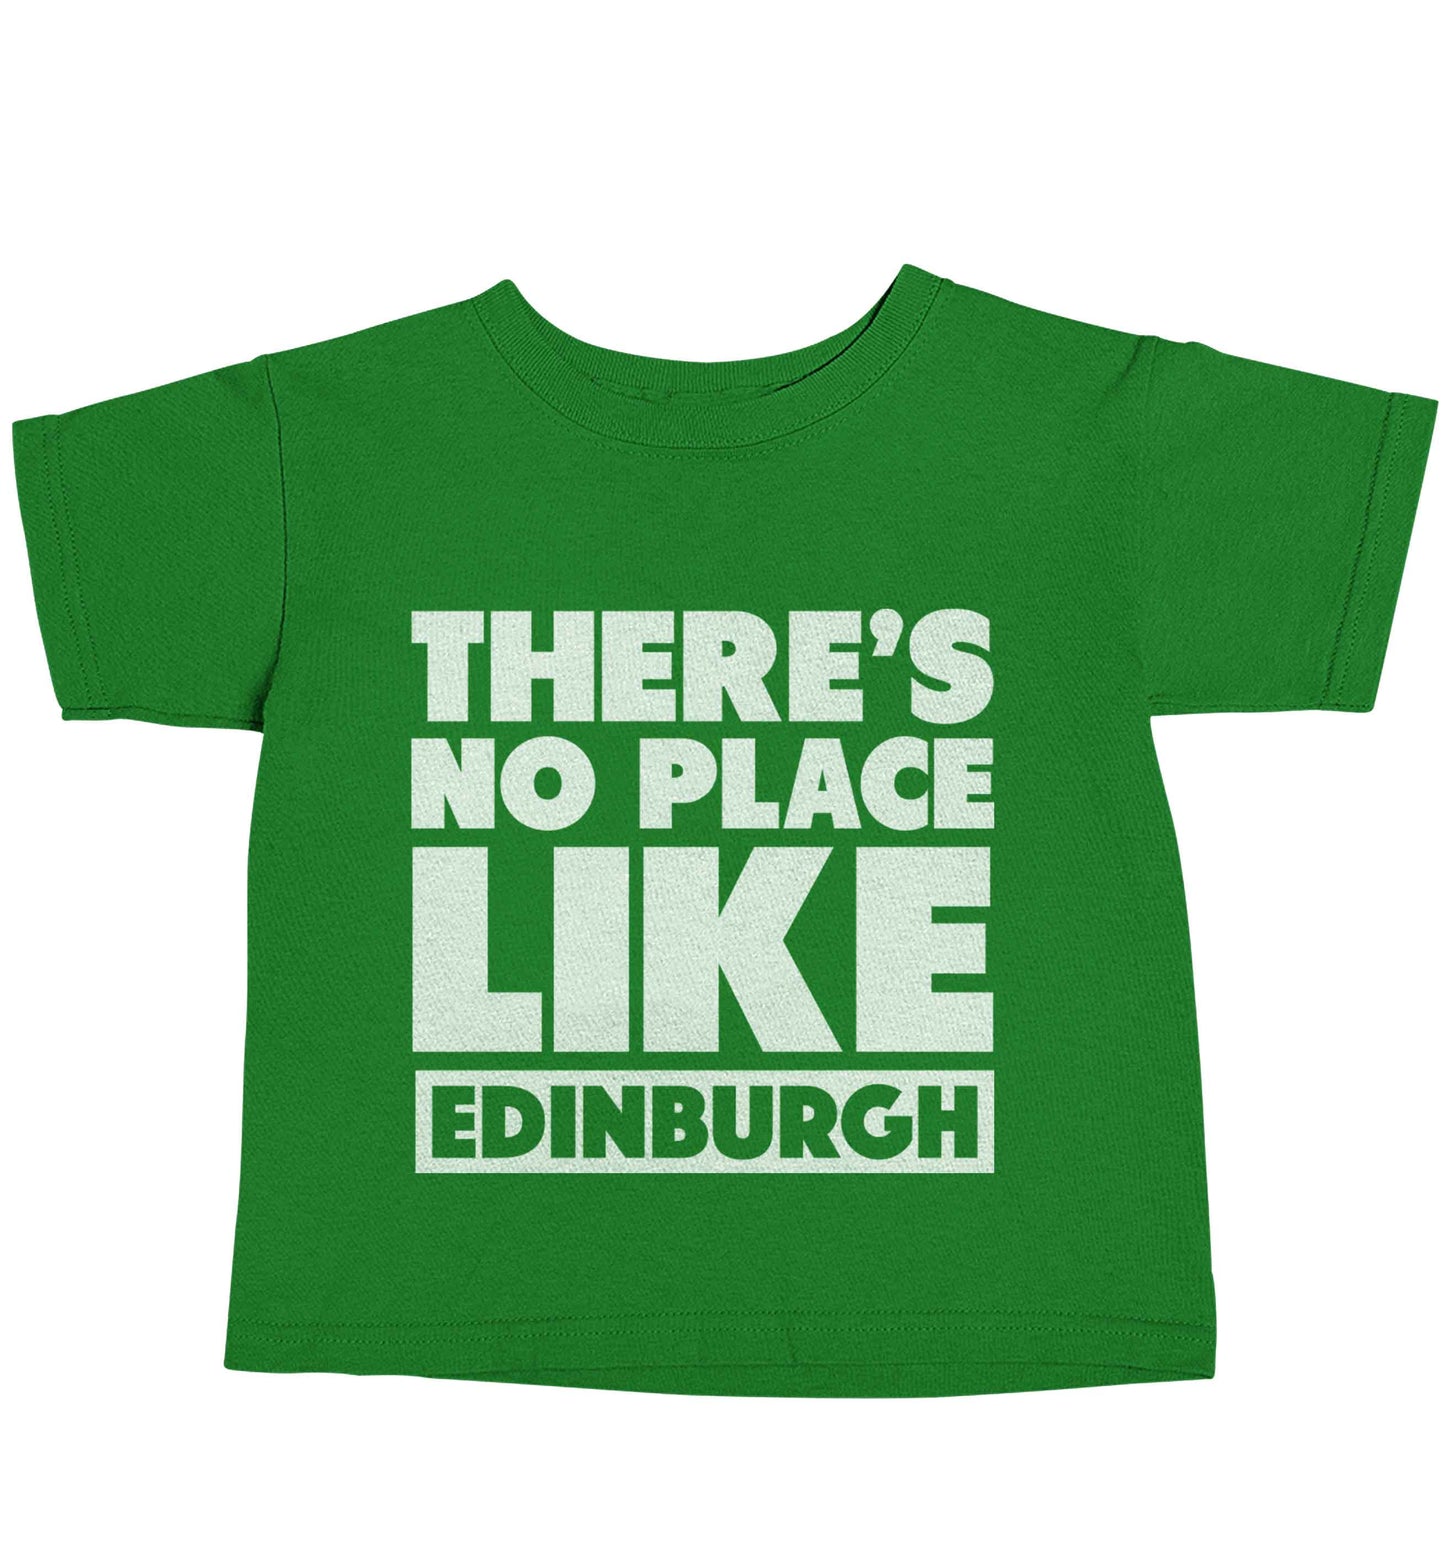 There's no place like Edinburgh green baby toddler Tshirt 2 Years